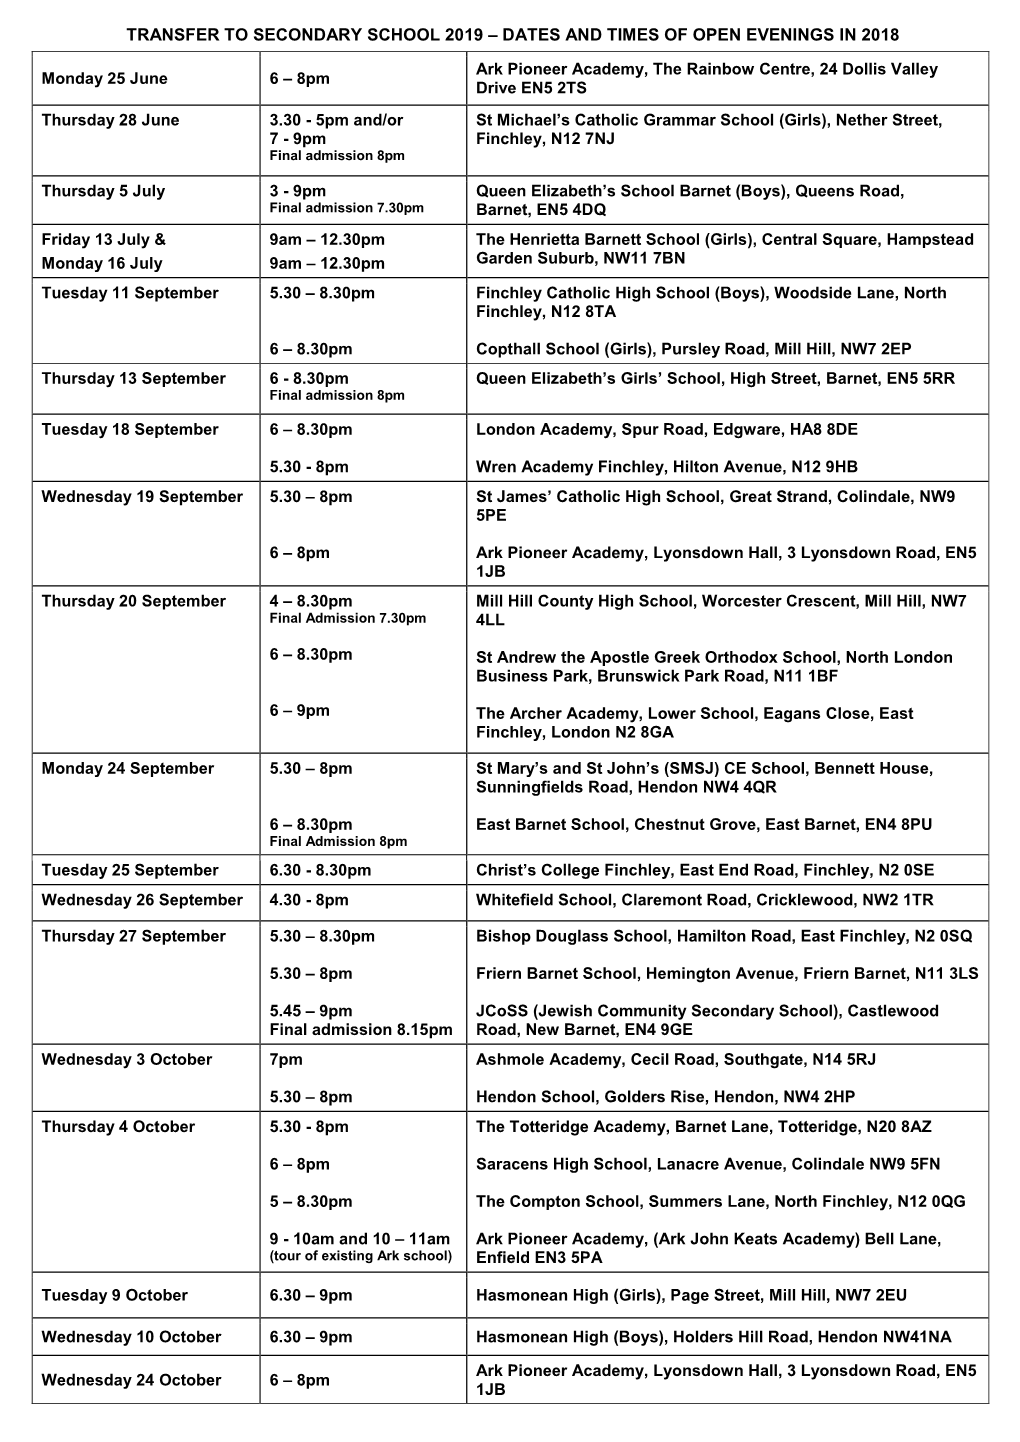 Transfer to Secondary School 2019 – Dates and Times of Open Evenings in 2018